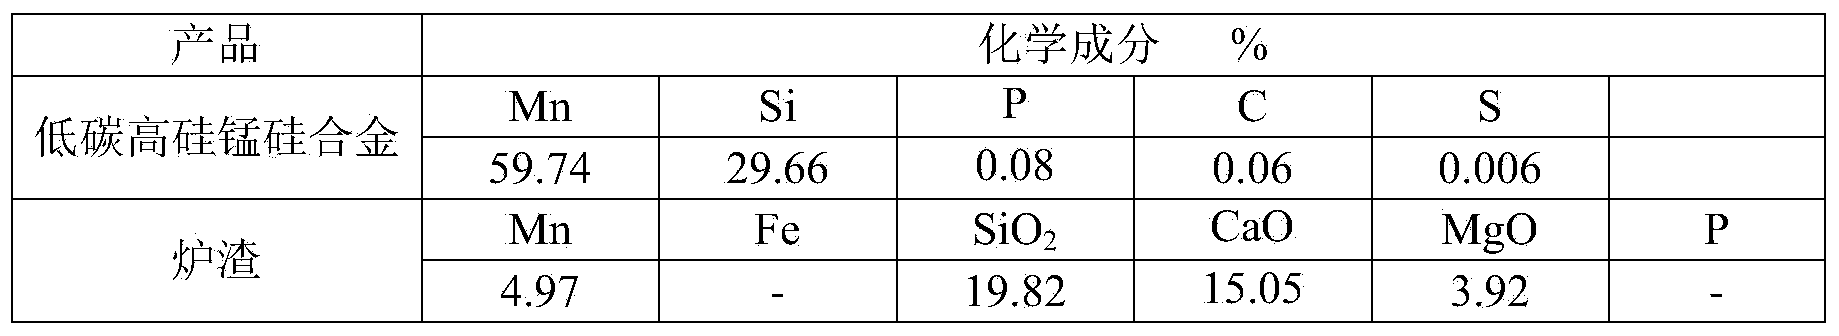 Method for producing low-carbon high-silicon manganese-silicon alloy from manganese-containing industrial waste slag through two-step method